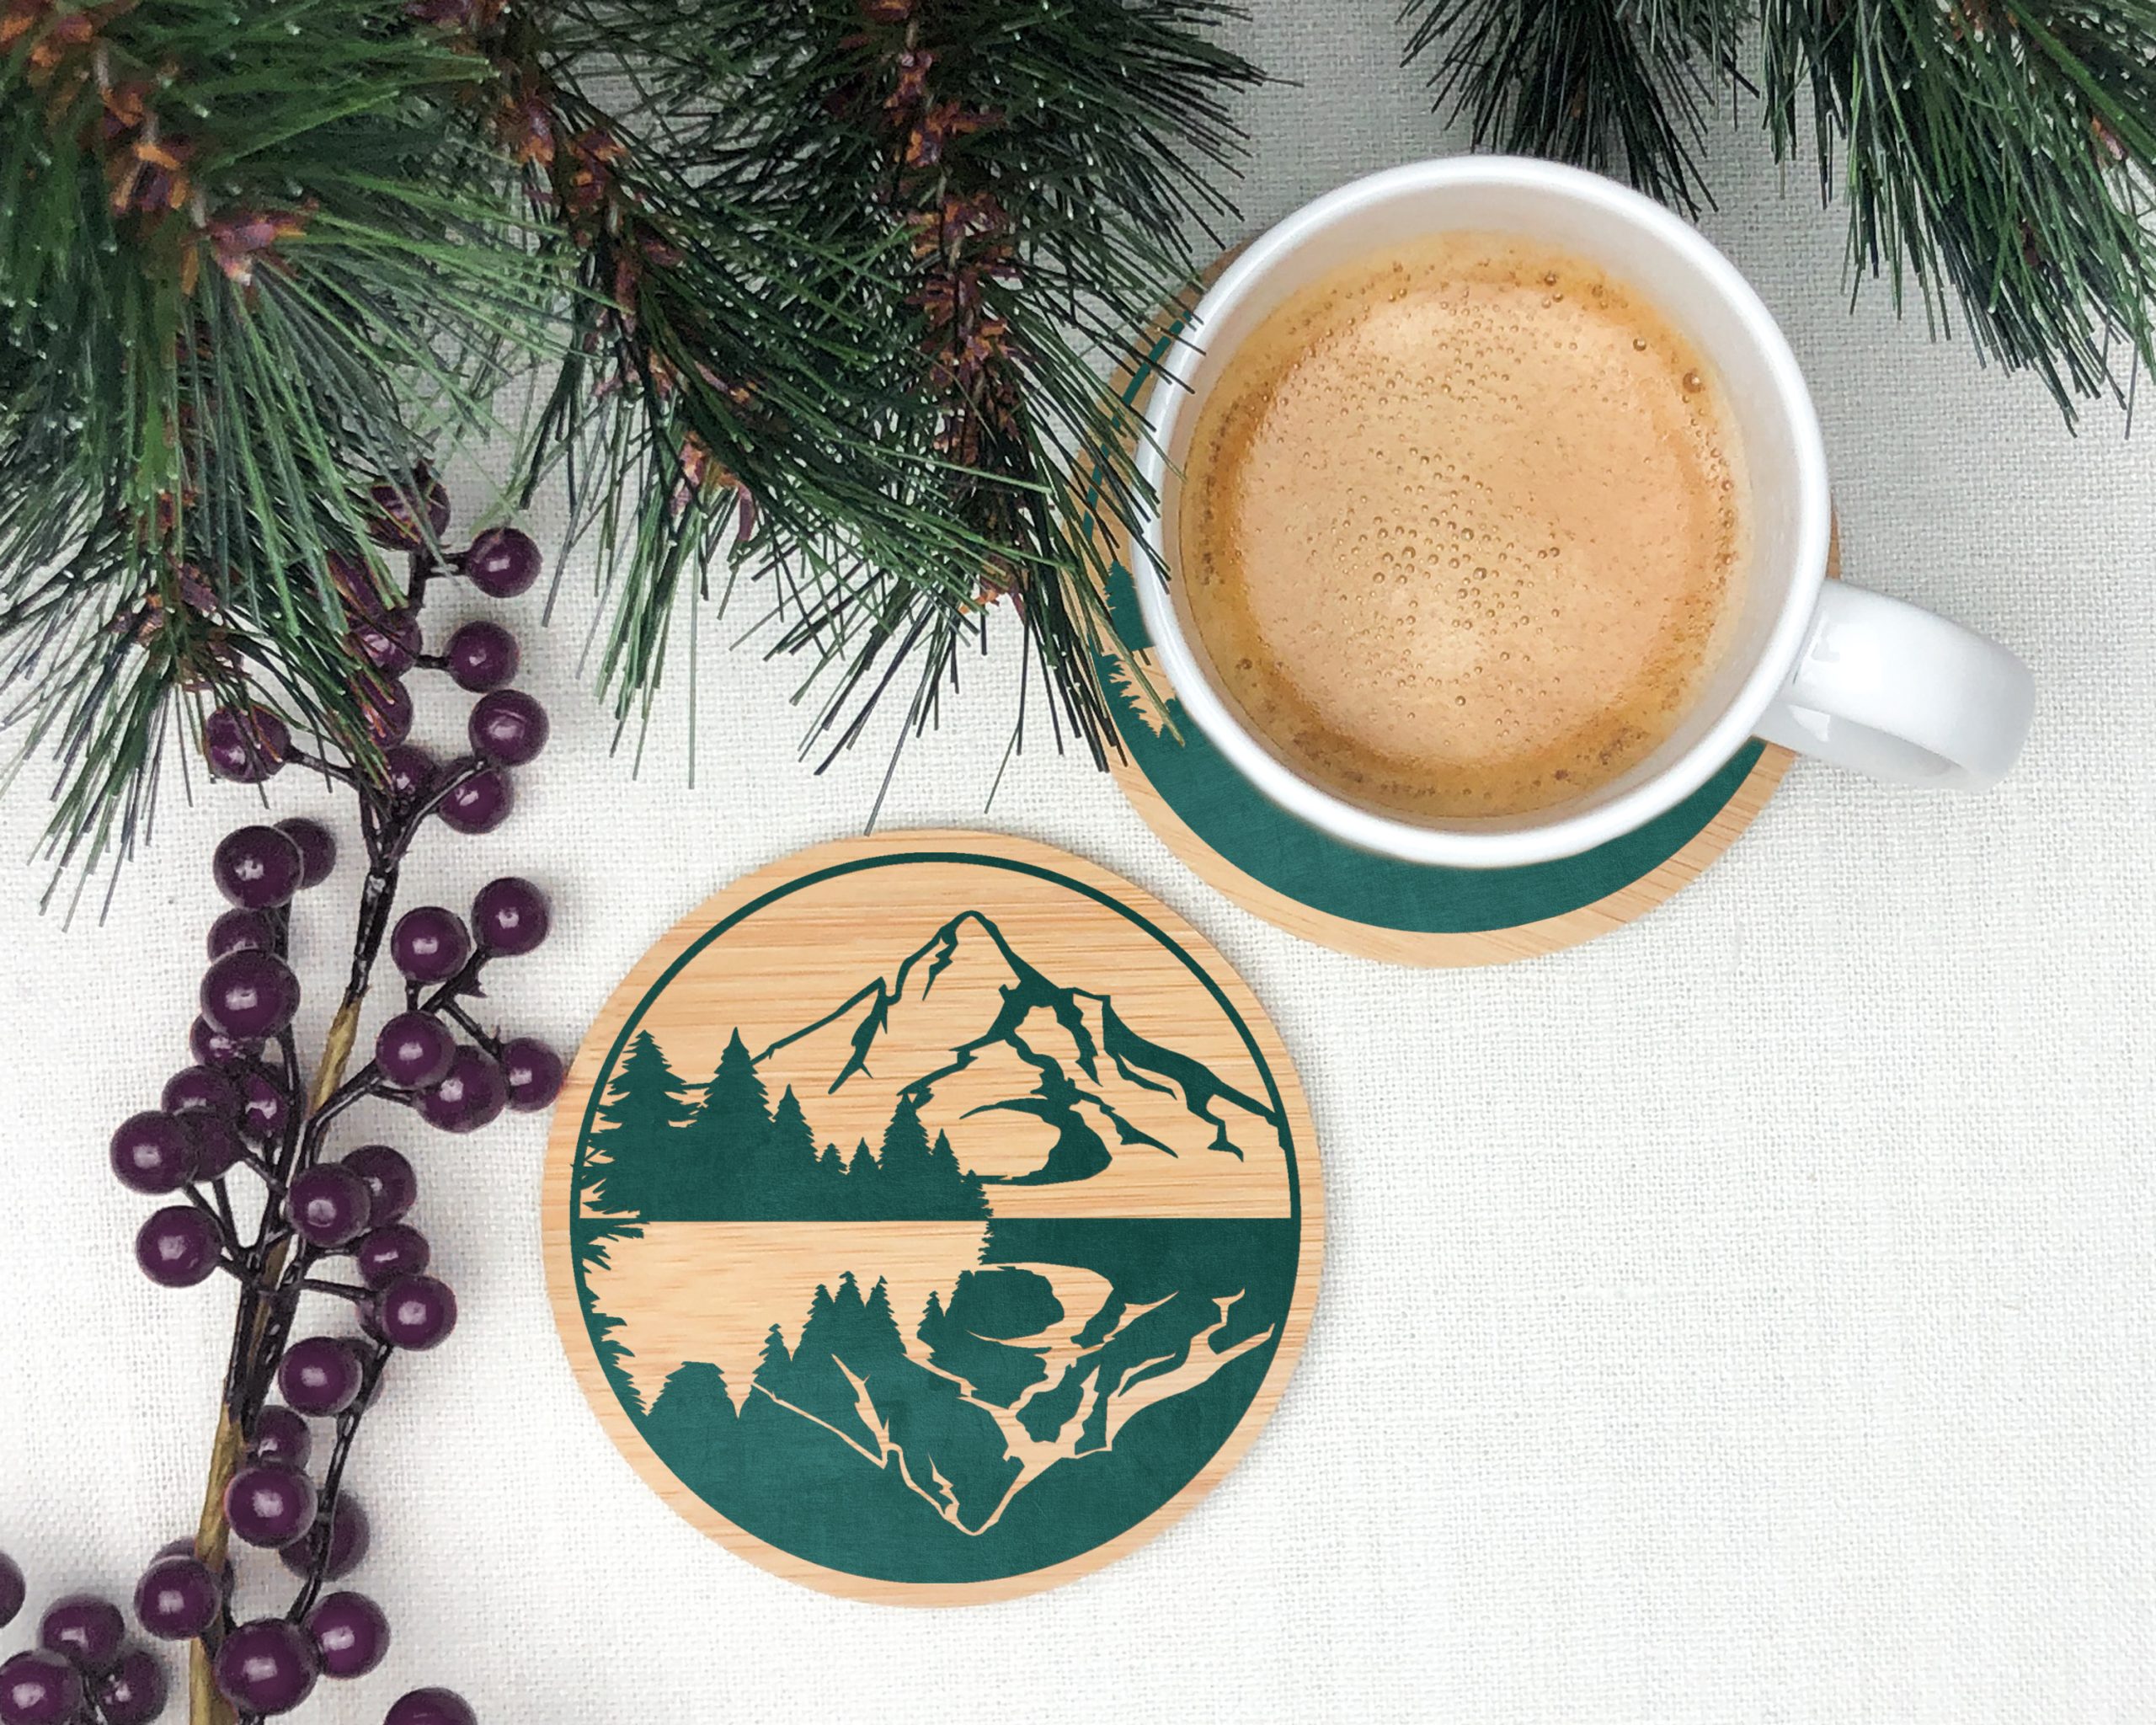 wood coaster decorated with a vinyl mountain scene near a mug o coffee and pine branches